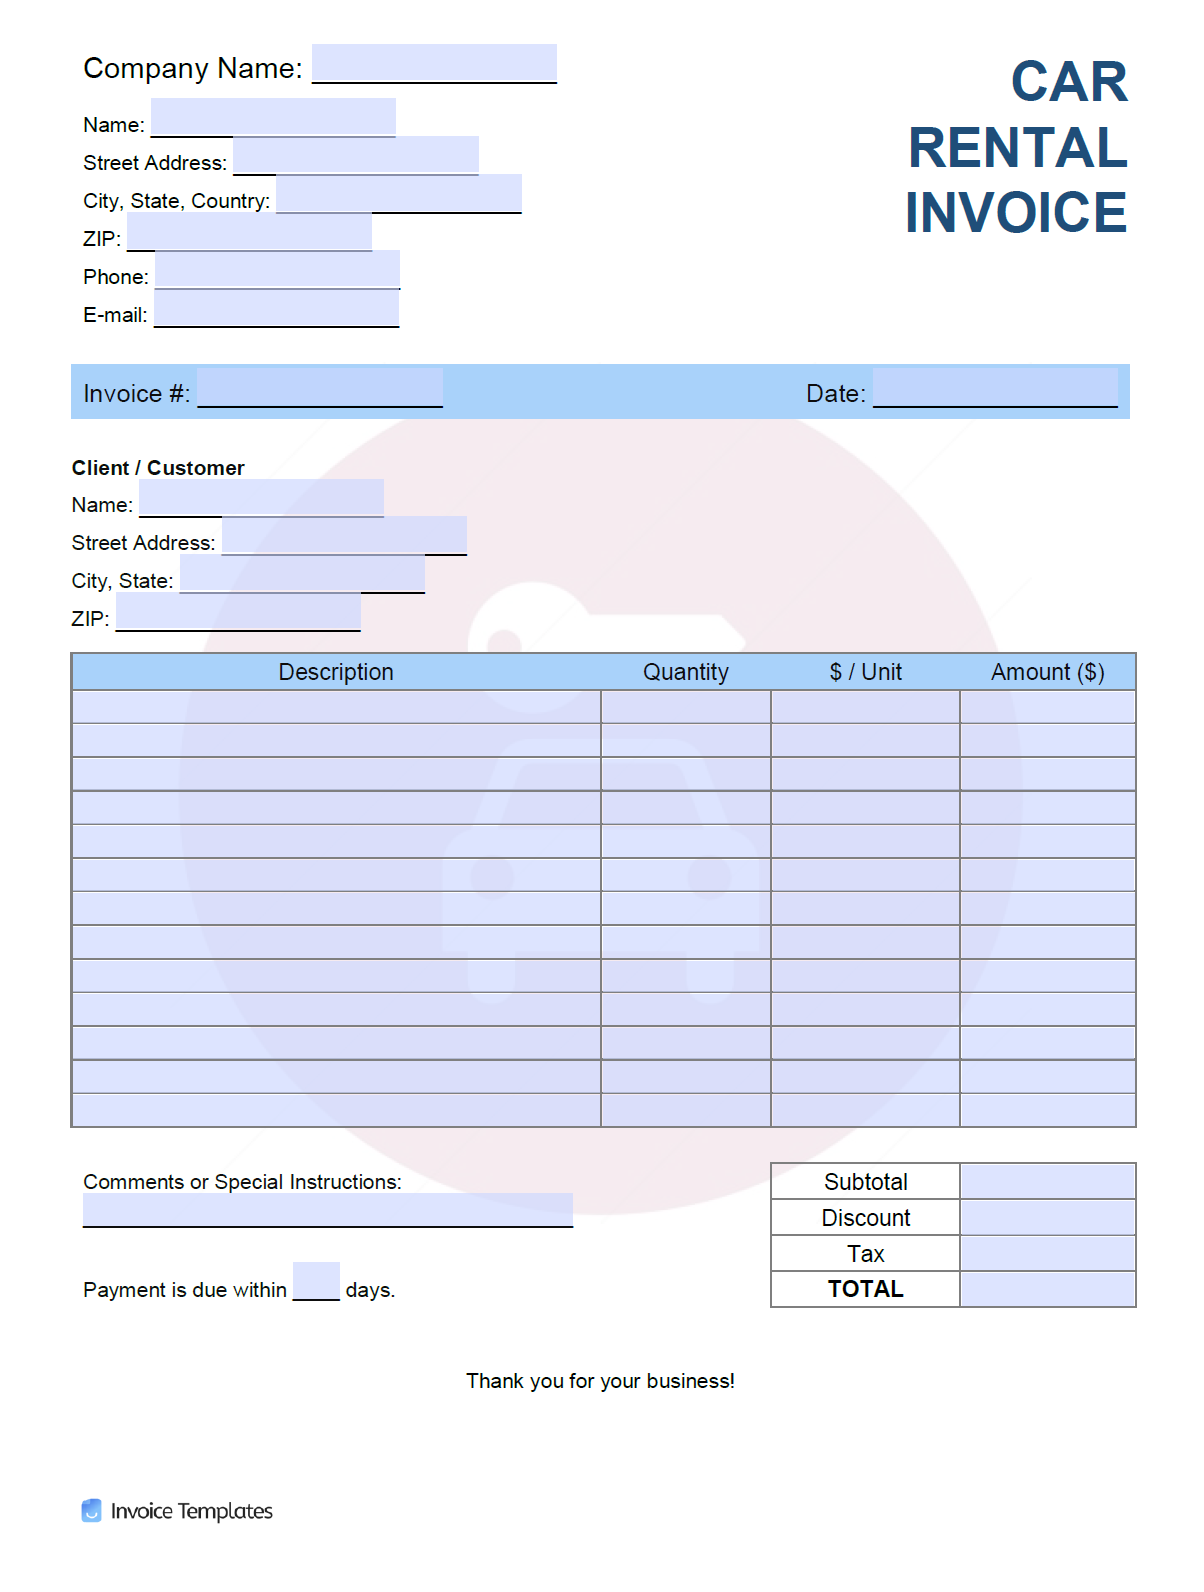 Free Car Rental Invoice Template Pdf Word Excel